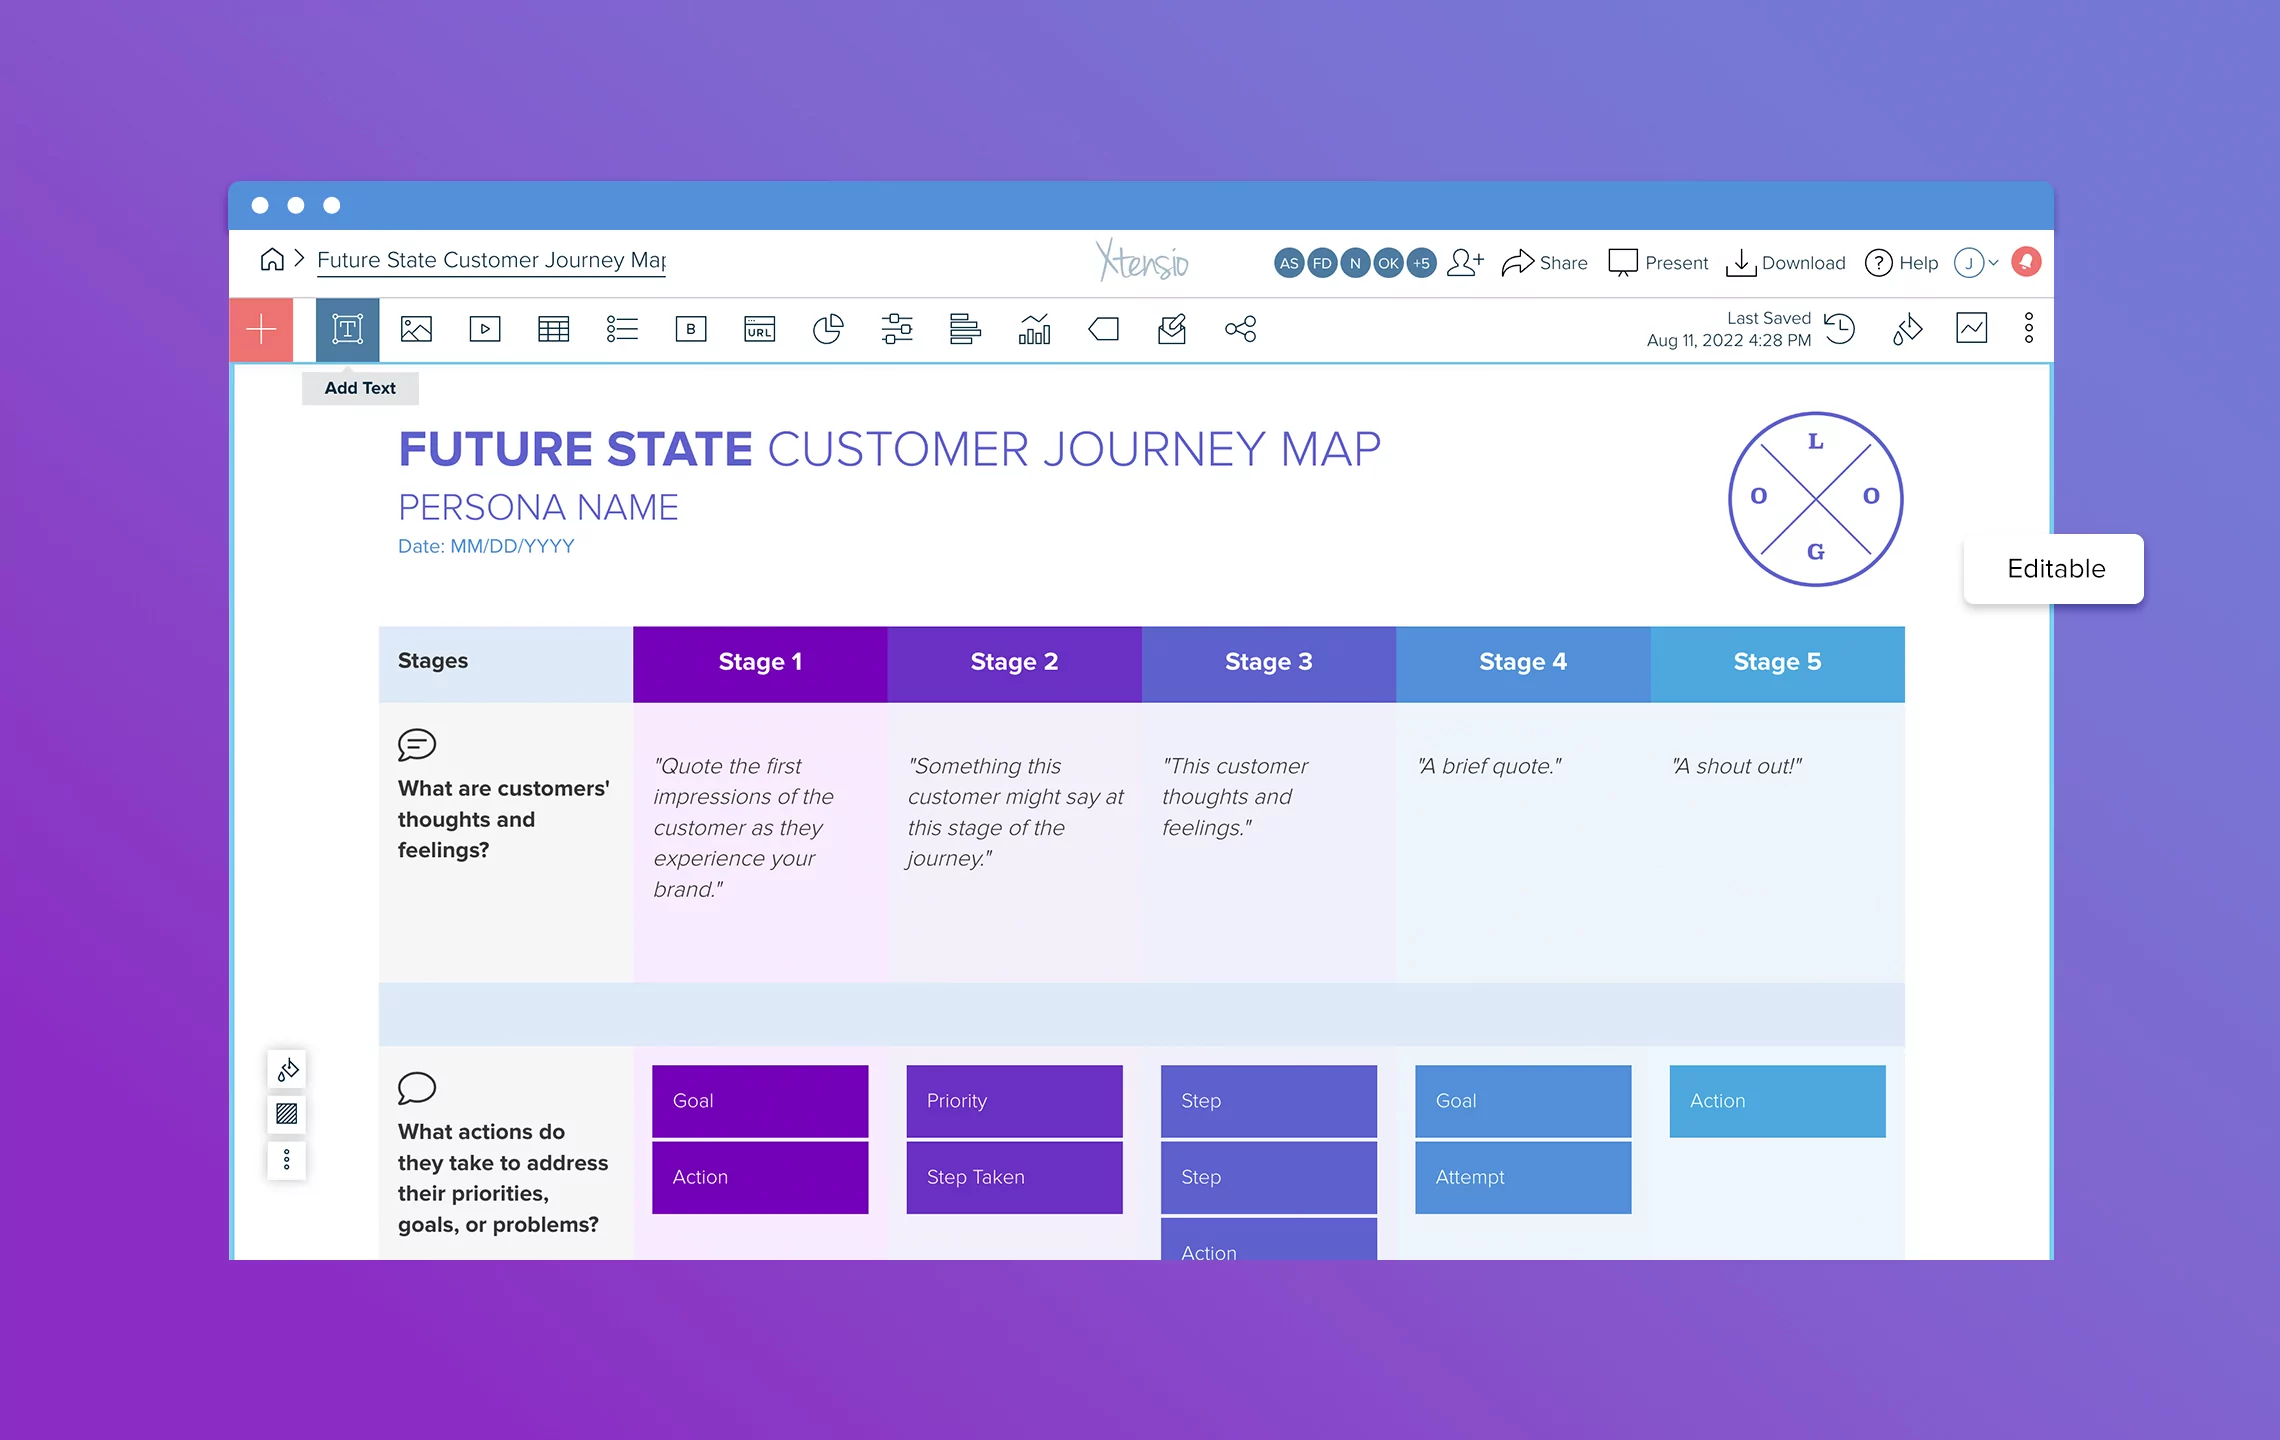 Customer Journey Map Variations: Future State Customer Journey Map